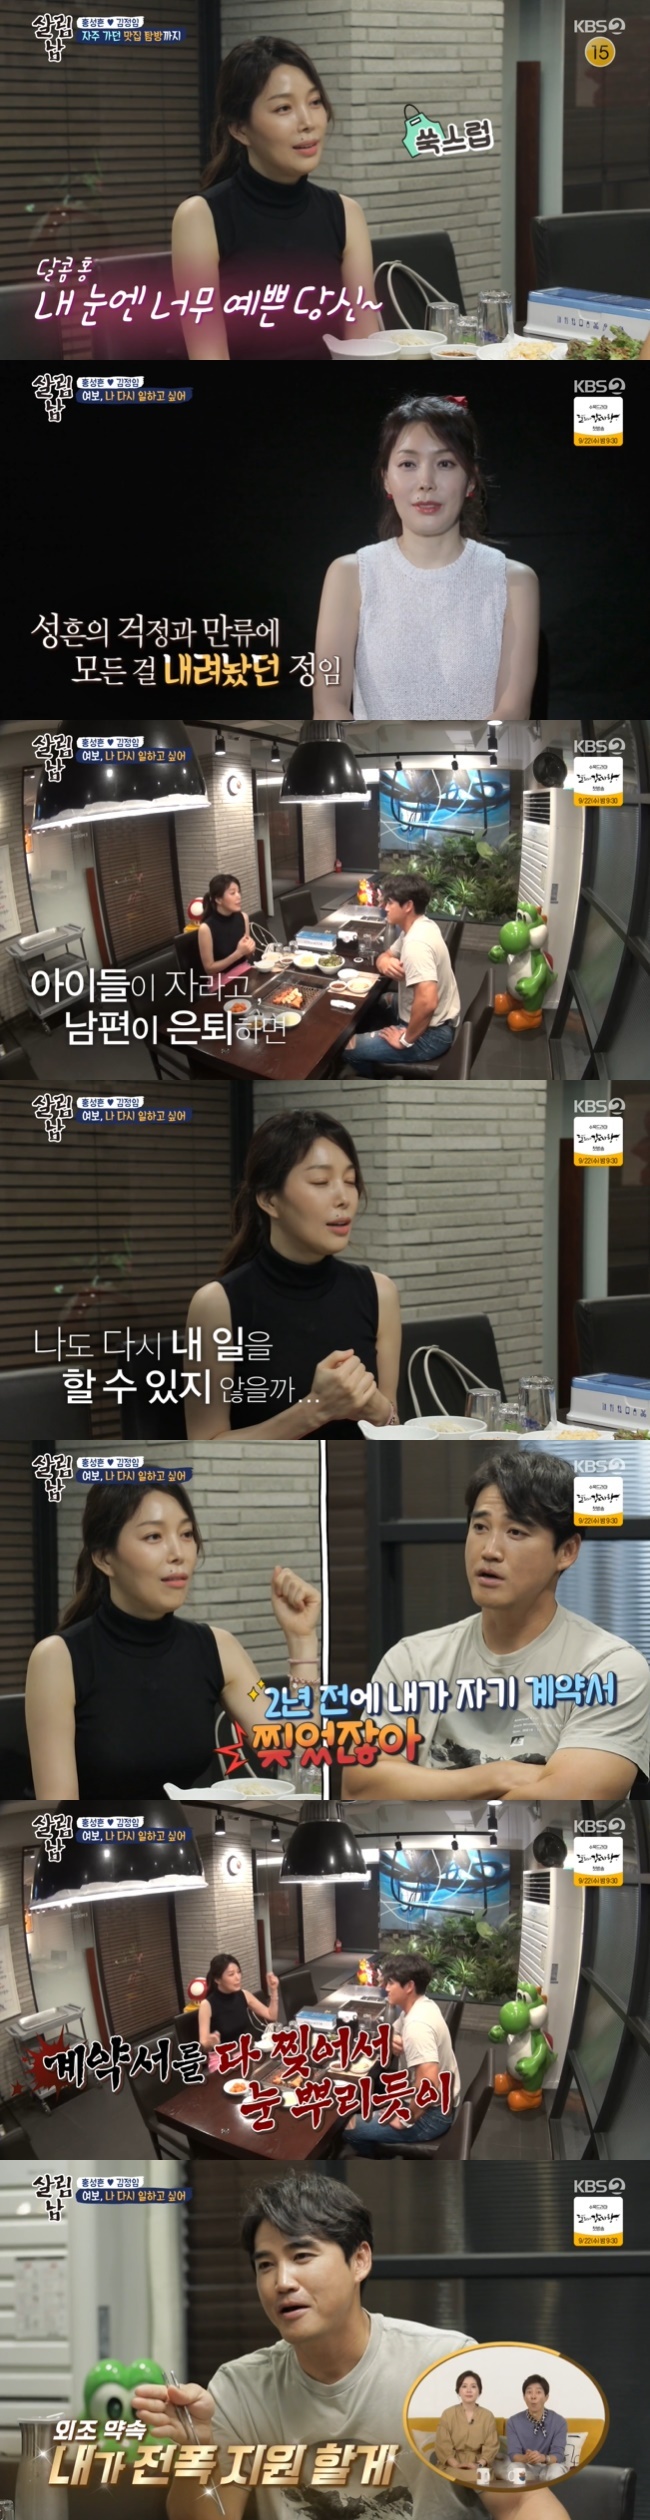 Hong Sung-heons wife Kim Jung Im has revealed why she was stopped from working on Model in the past.On KBS 2TV Saving Men Season 2 broadcast on September 4, Hong Sung-heons wife Kim Jung Im persuaded Husband to start work again.They went to the two-country store where Hong Sung-heon visited often during his career. Hong Sung-heon said, Its like a different person.It is so beautiful, he said, showing a friendly aspect of taking care of his wifes food first.Kim Jung Im said, I like it because youre pretty, and I thought it would be bad if you were pretty. But now youre too old.Youre home, and you want to do it again. Things keep coming in. I want to do it when I get the chance.Kim Jung Im, who worked as a model before marriage, said, It was what I wanted to do and liked, but I stopped because I wanted to be uneasy and not when I left for the expedition.It has been 21 years since I did not work. It seems that I was pressing my heart.When the parenting and Husband baseball ended, I was waiting for it to be said, I could do what I wanted to do.Hong Sung-heon has openly opened Kim Jung Ims Model job and said he had torn it to Contract two years ago.Kim Jung Im recalled the situation at the time of Hong Sung-heons words, I did not think that you would tear the contract and spray it on me like snow.I put it down (Model work) then, I guess its not in my life.I told them not to do it because they thought that children should grow a little more at the time and that you can not do it well if you look at your work, said Hong Sung-heon, who was a coach in the United States two years ago.Ill support you, he said, and Ill give you a chance to do it, and Ill take care of the children and make them a meal instead of buying them.